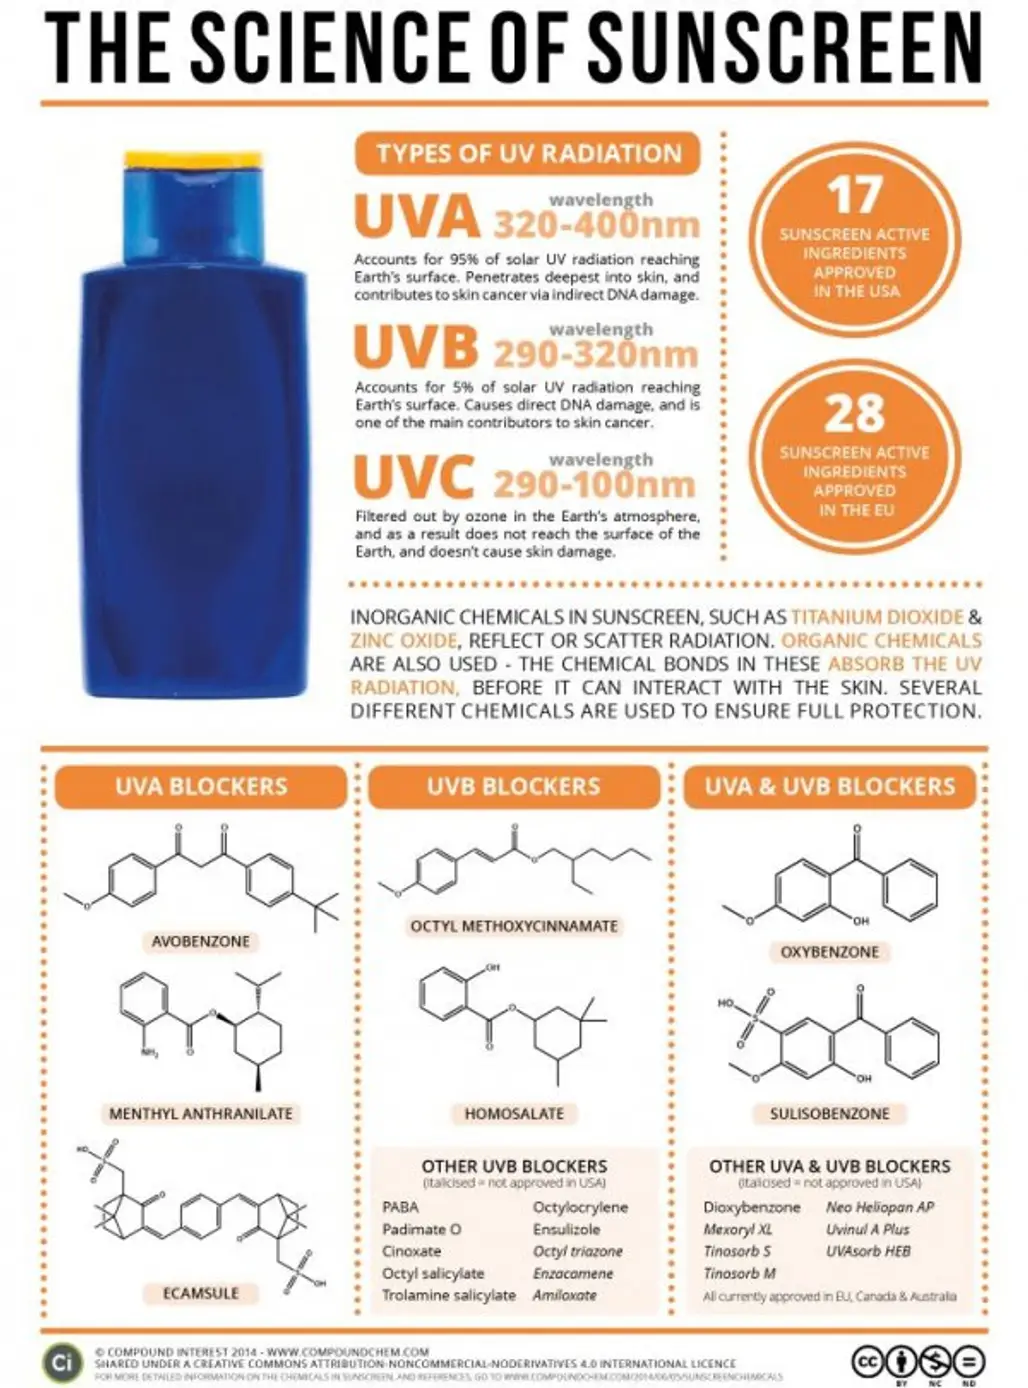 The Science of Sunscreen